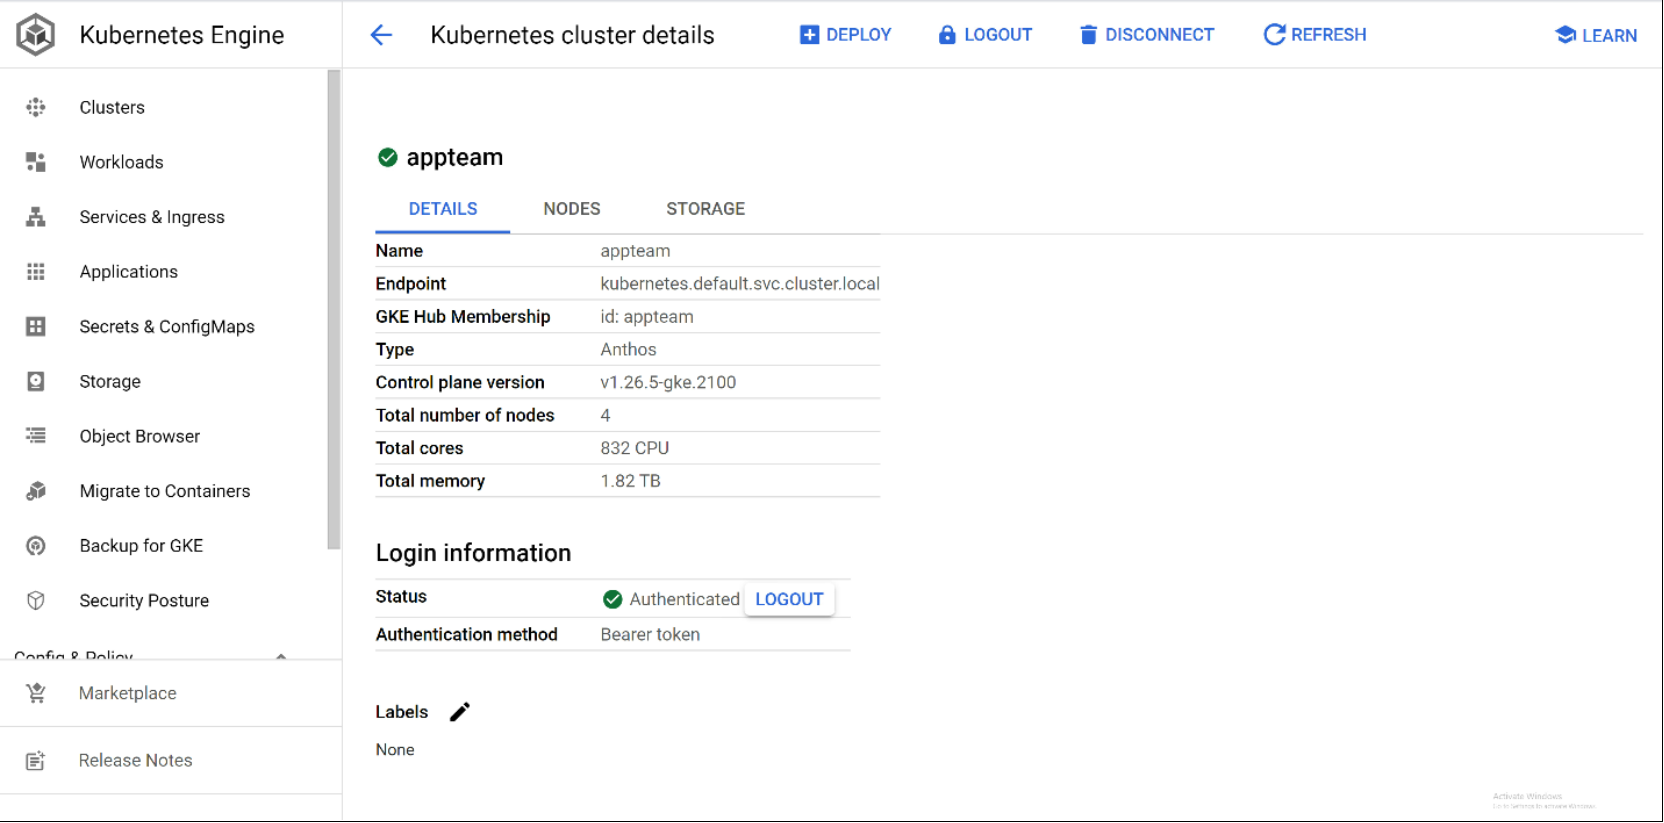 This figure shows the details of a Kubernetes cluster deployed on the nodes.